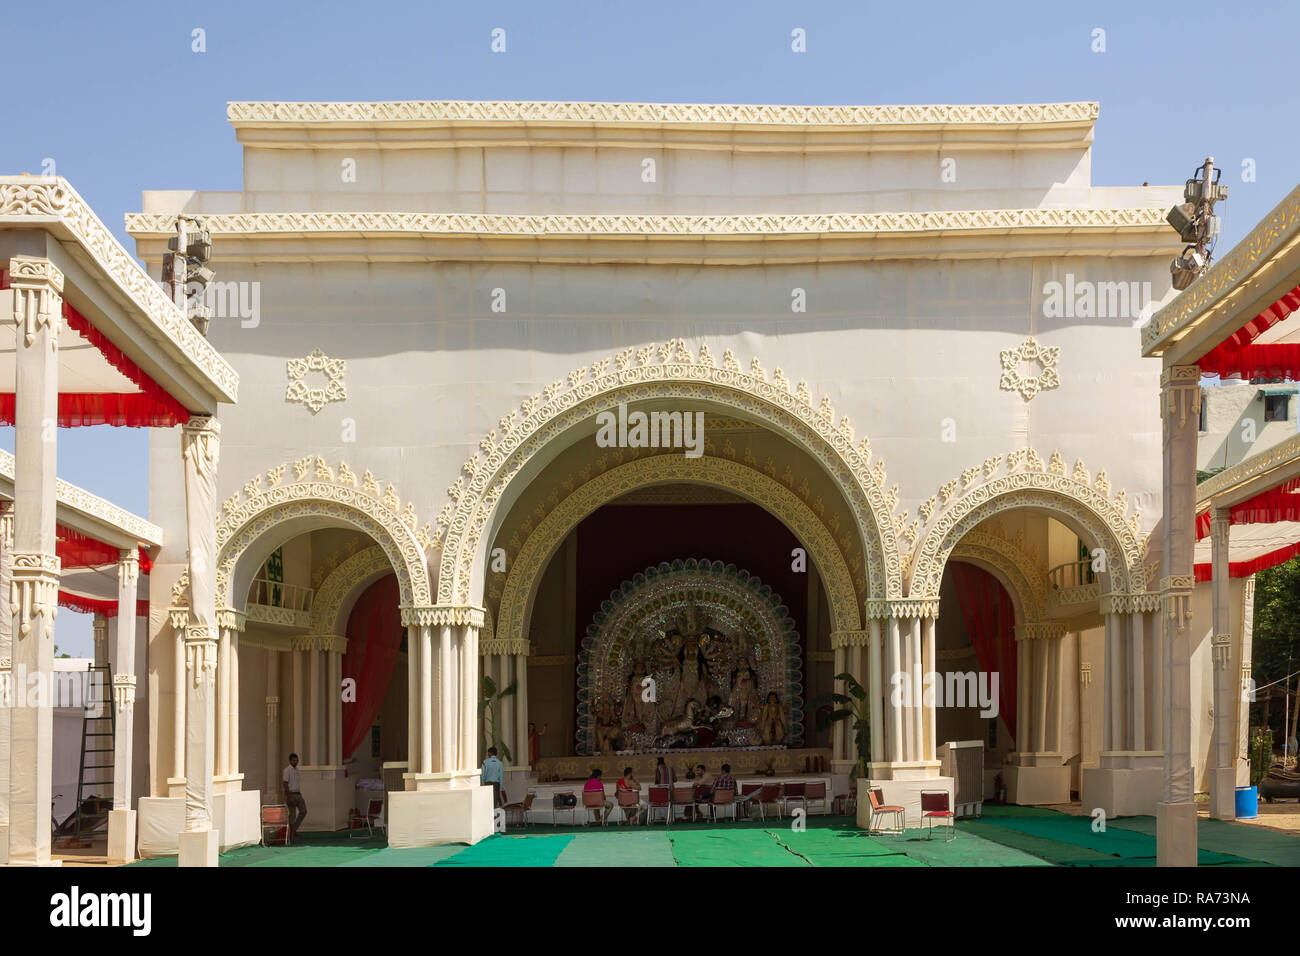 Grater Kailash,New Delhi , India , Dt-30 Sep 2014. A View Of Durga Puja Pandal  In Landscape Mode Stock Photo